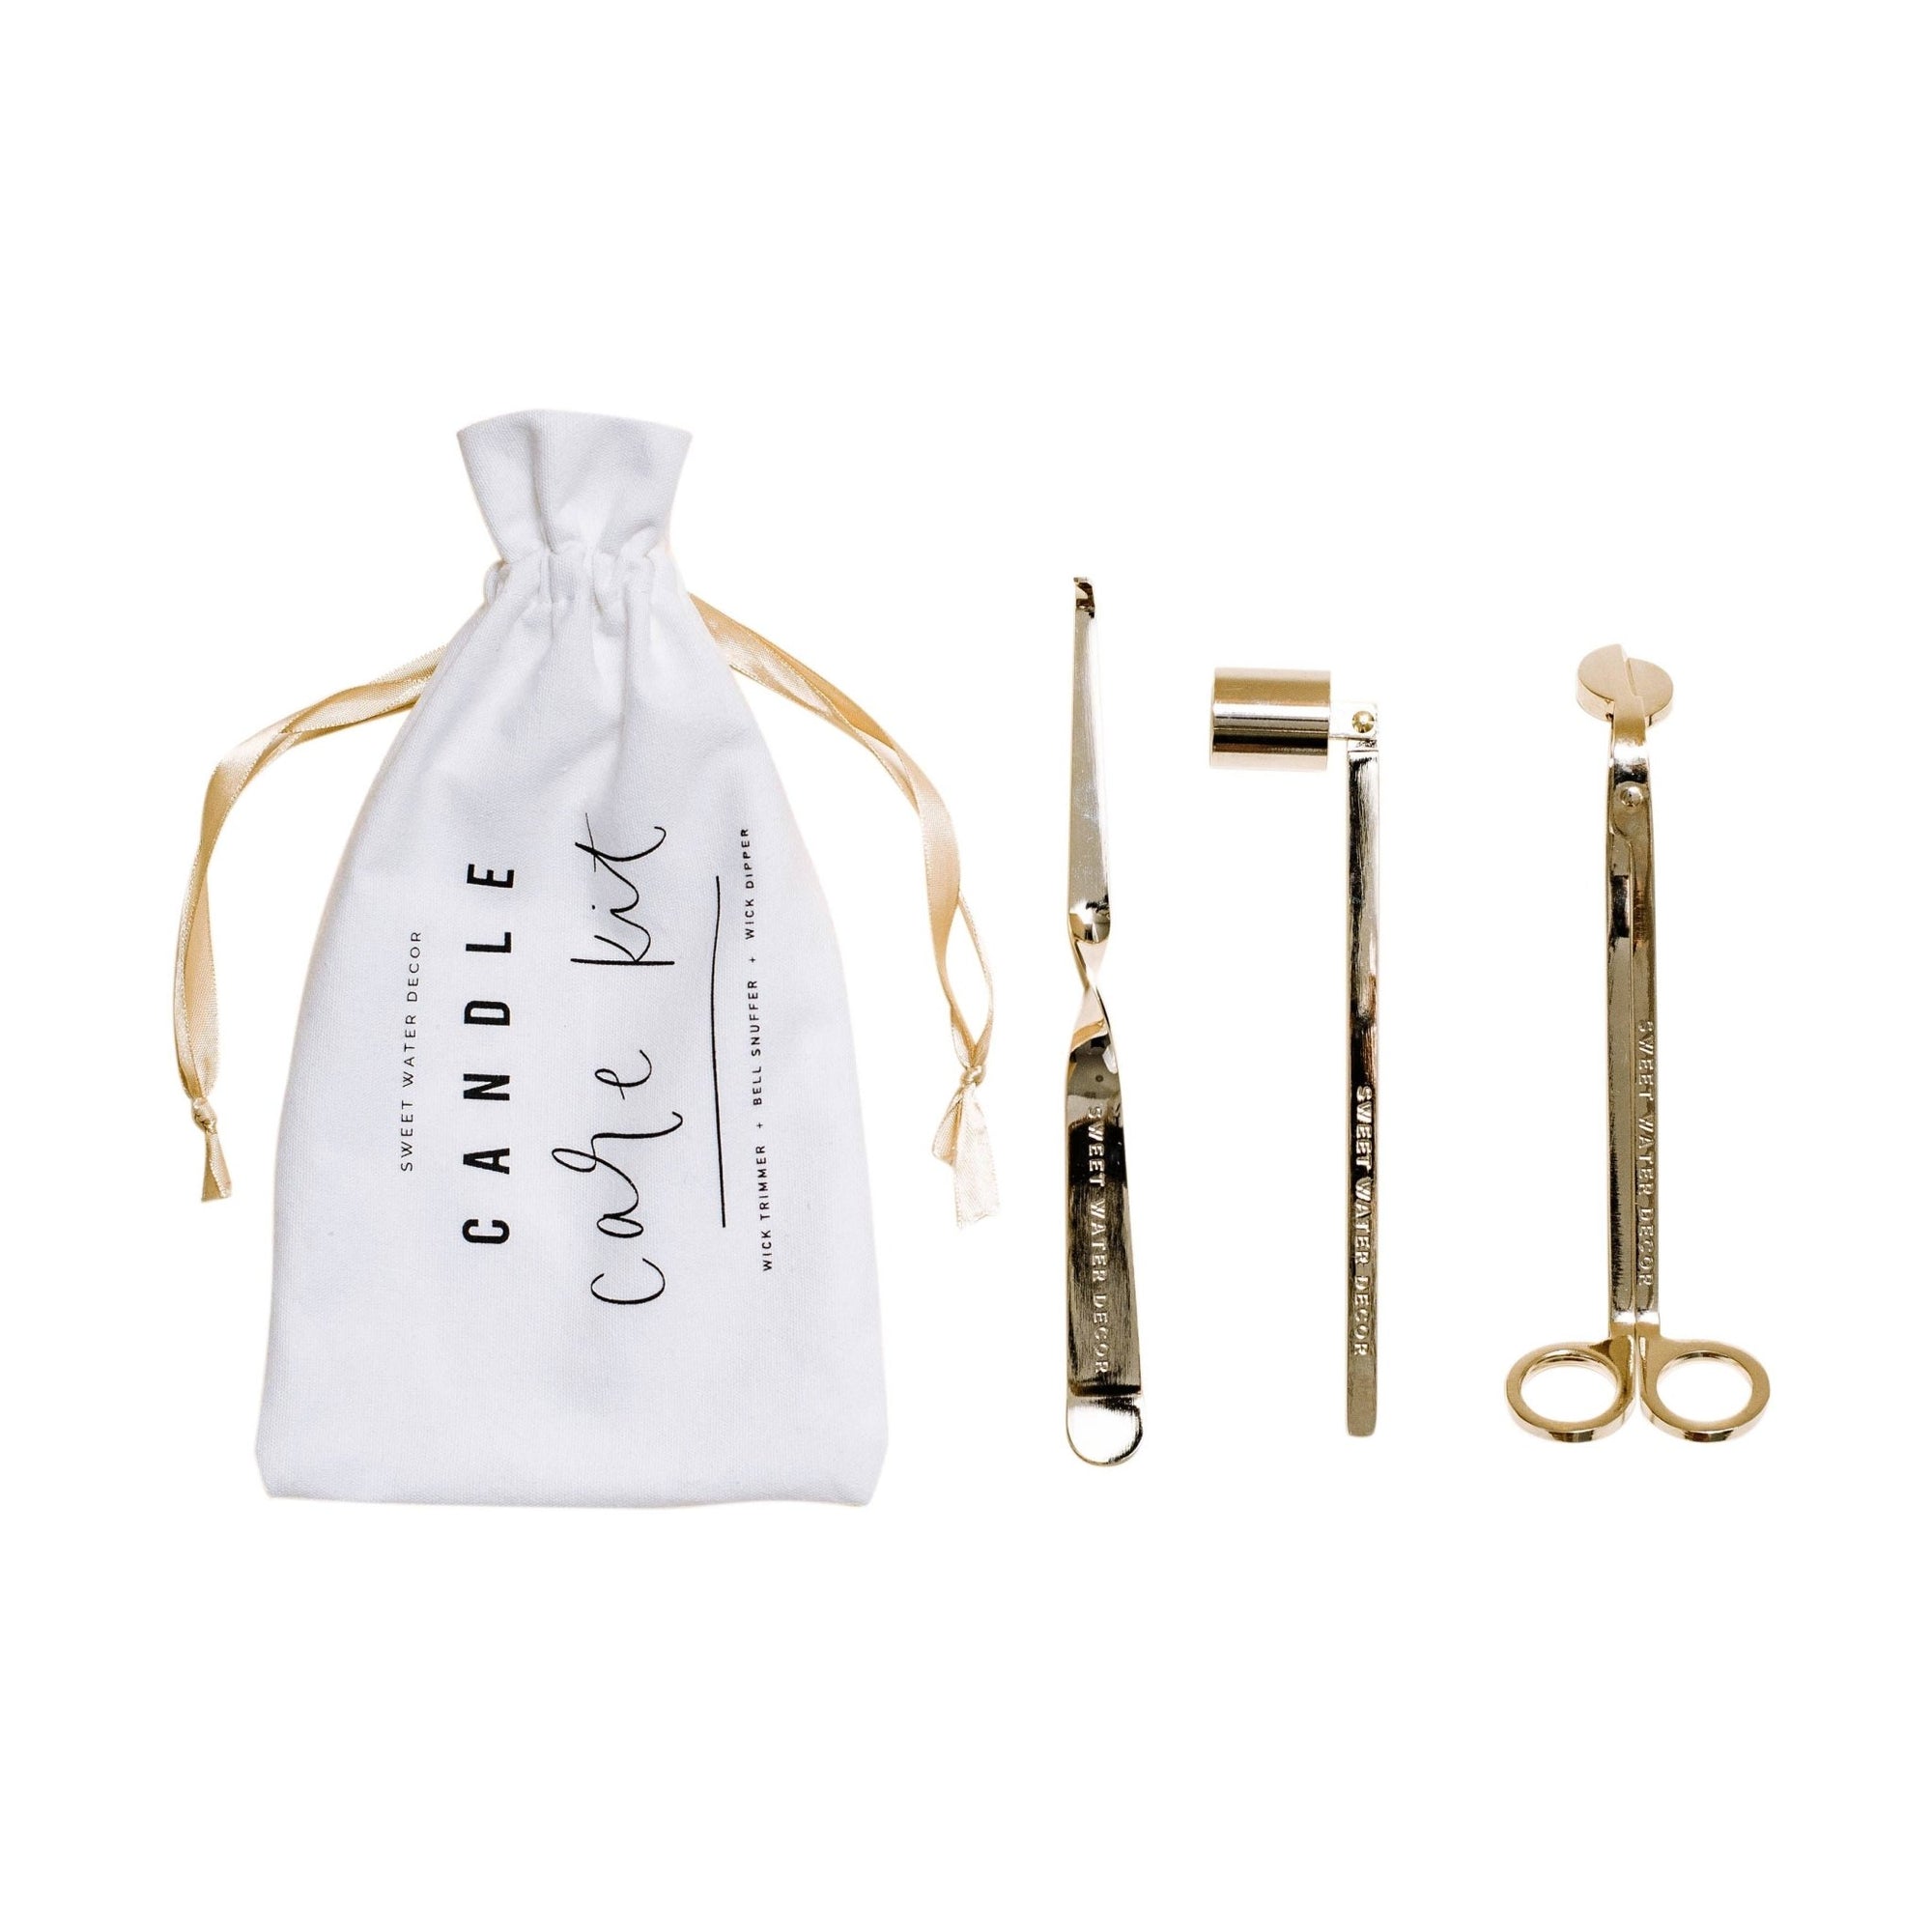 Gold Candle Care Kit - Home Decor & Gifts - Olivia Macaron